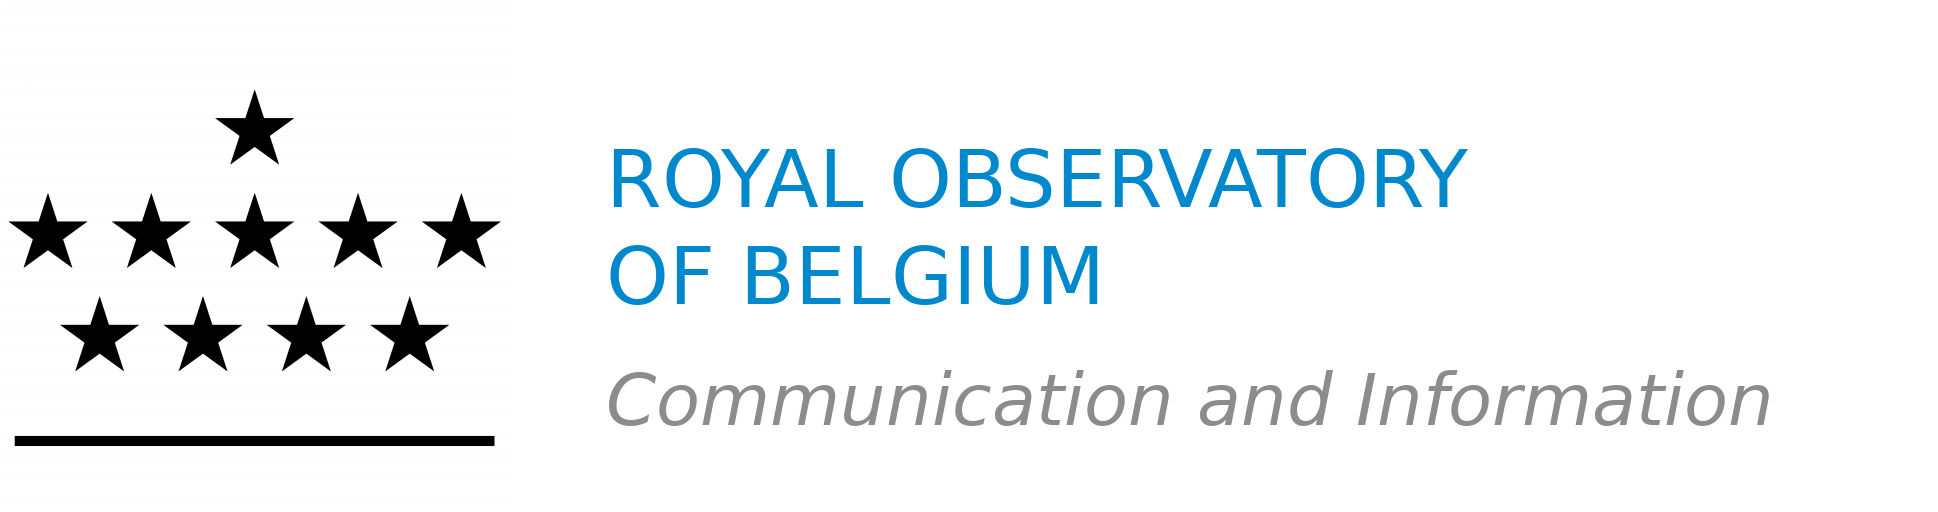 Royal Observatory of Belgium – Communication and Information